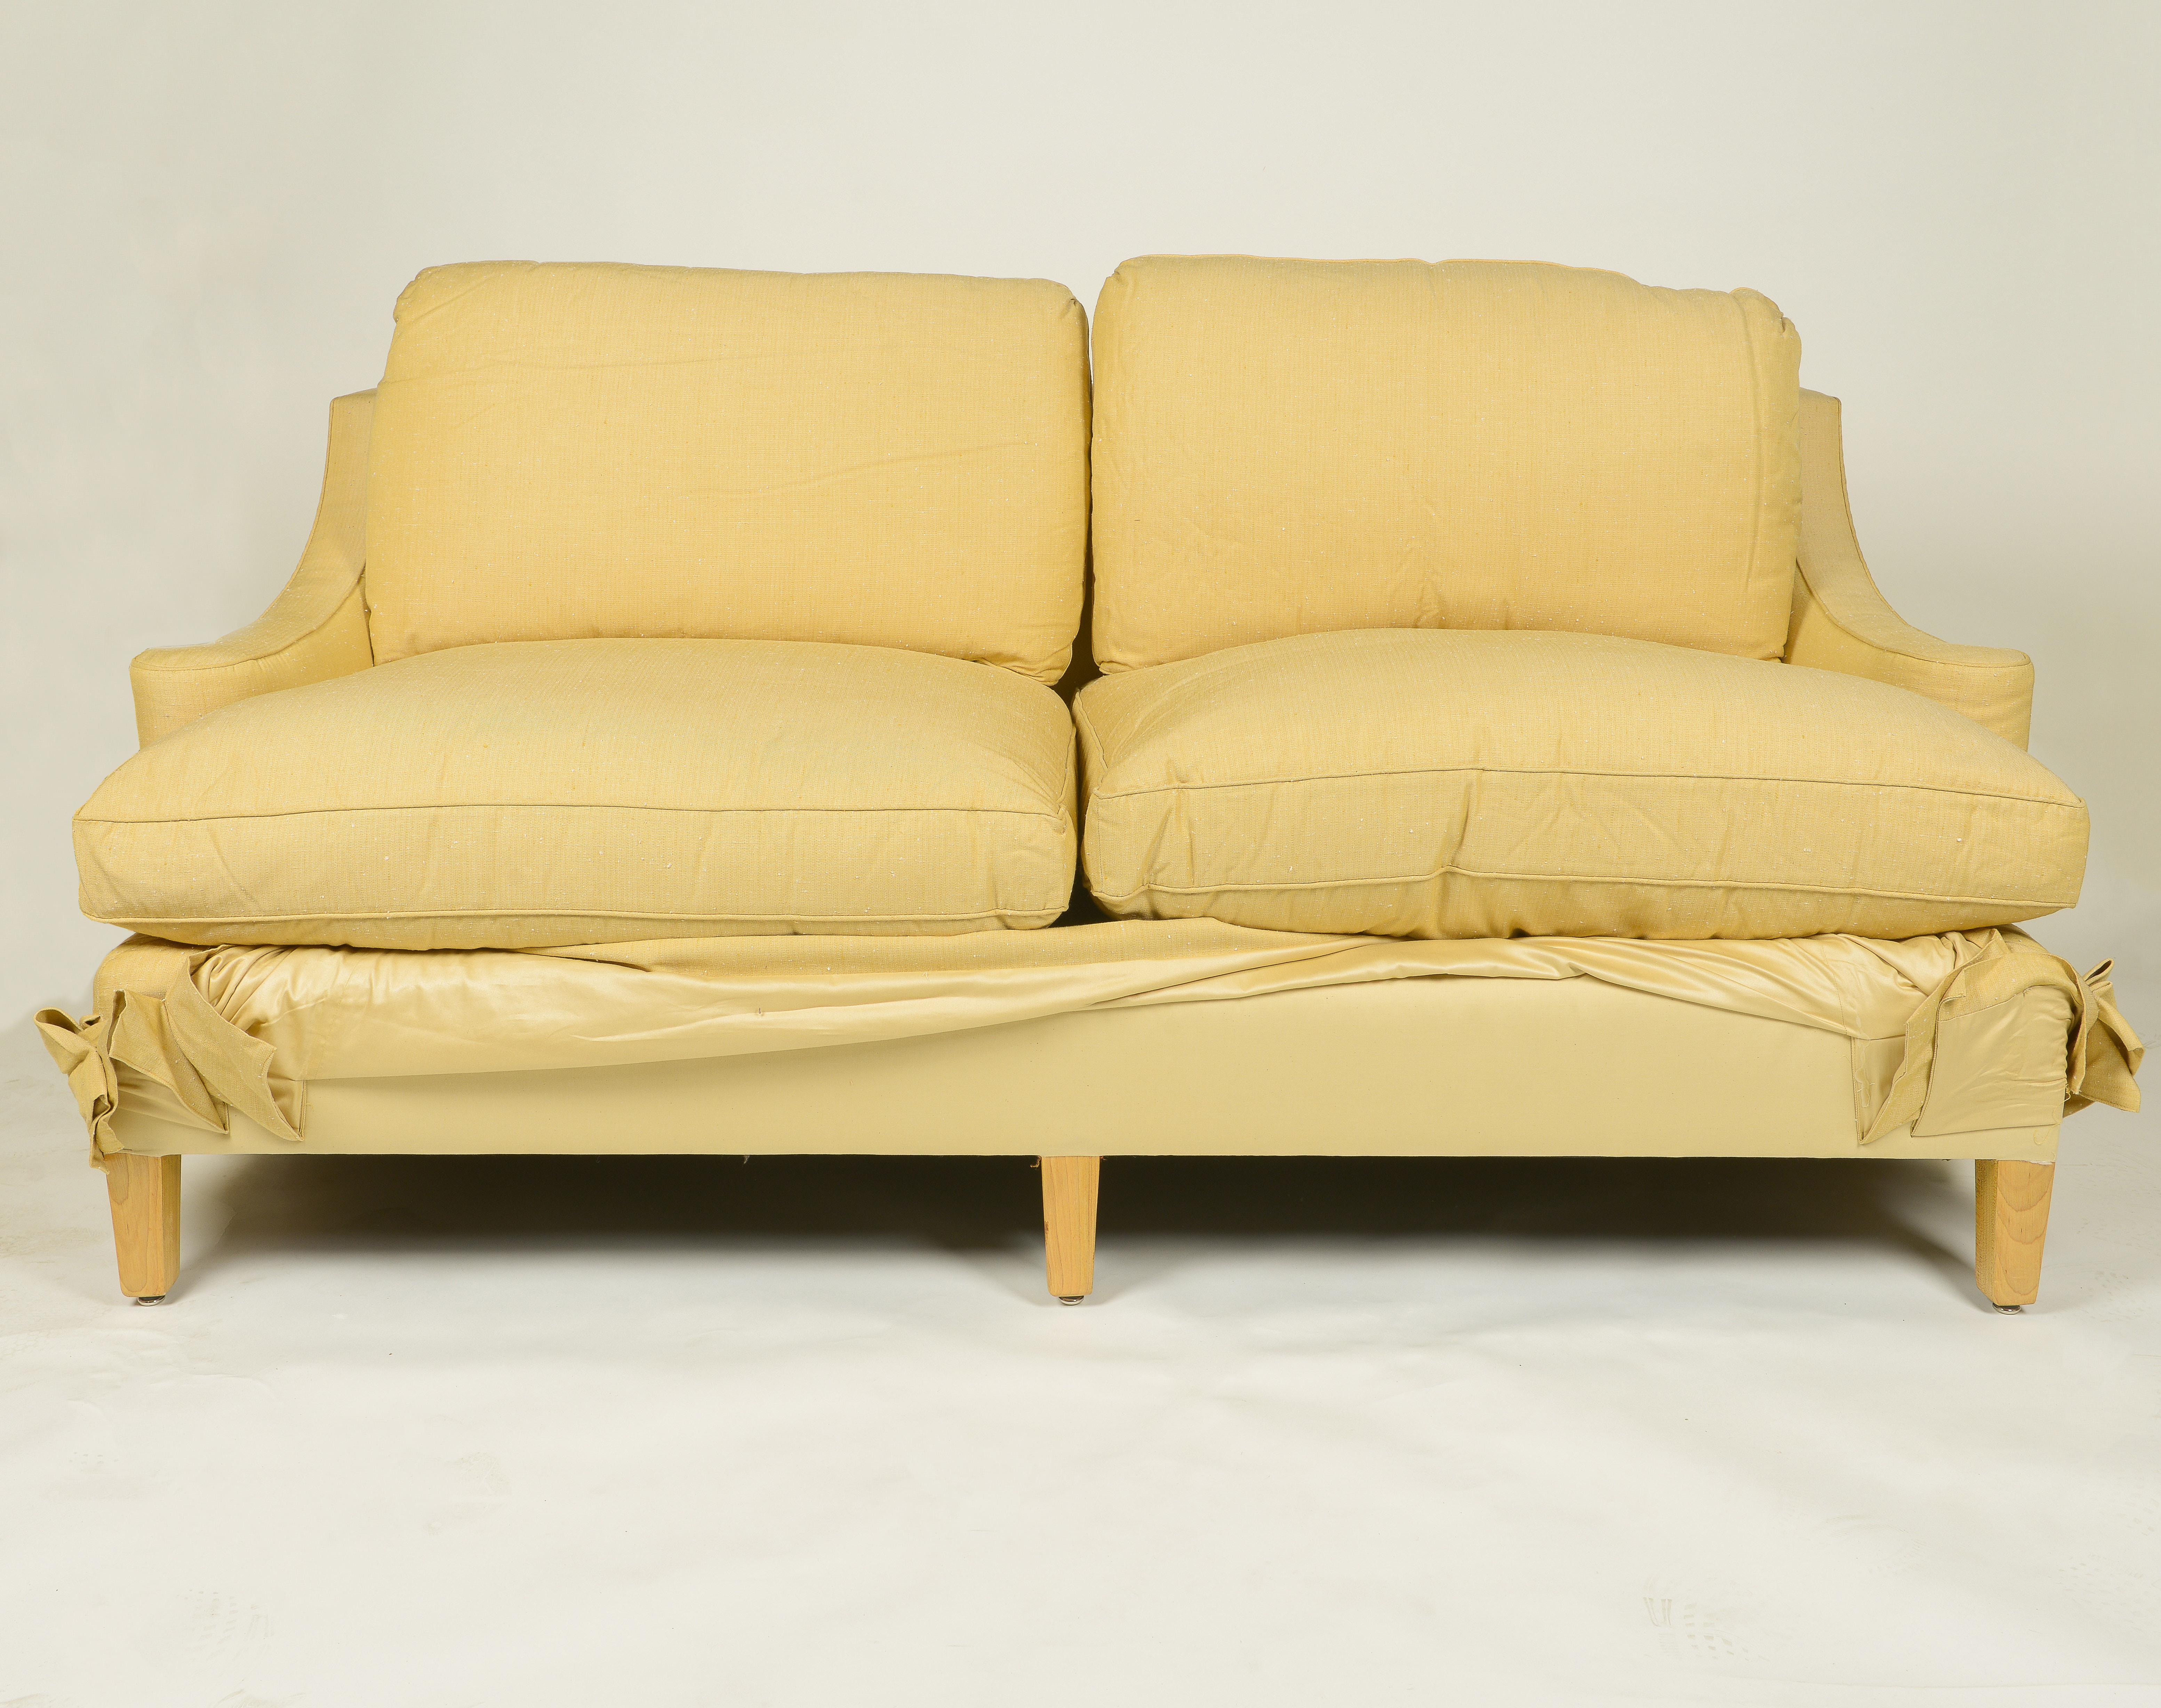 DeAngelis Silk Two-Seater Sofa In Excellent Condition For Sale In New York, NY